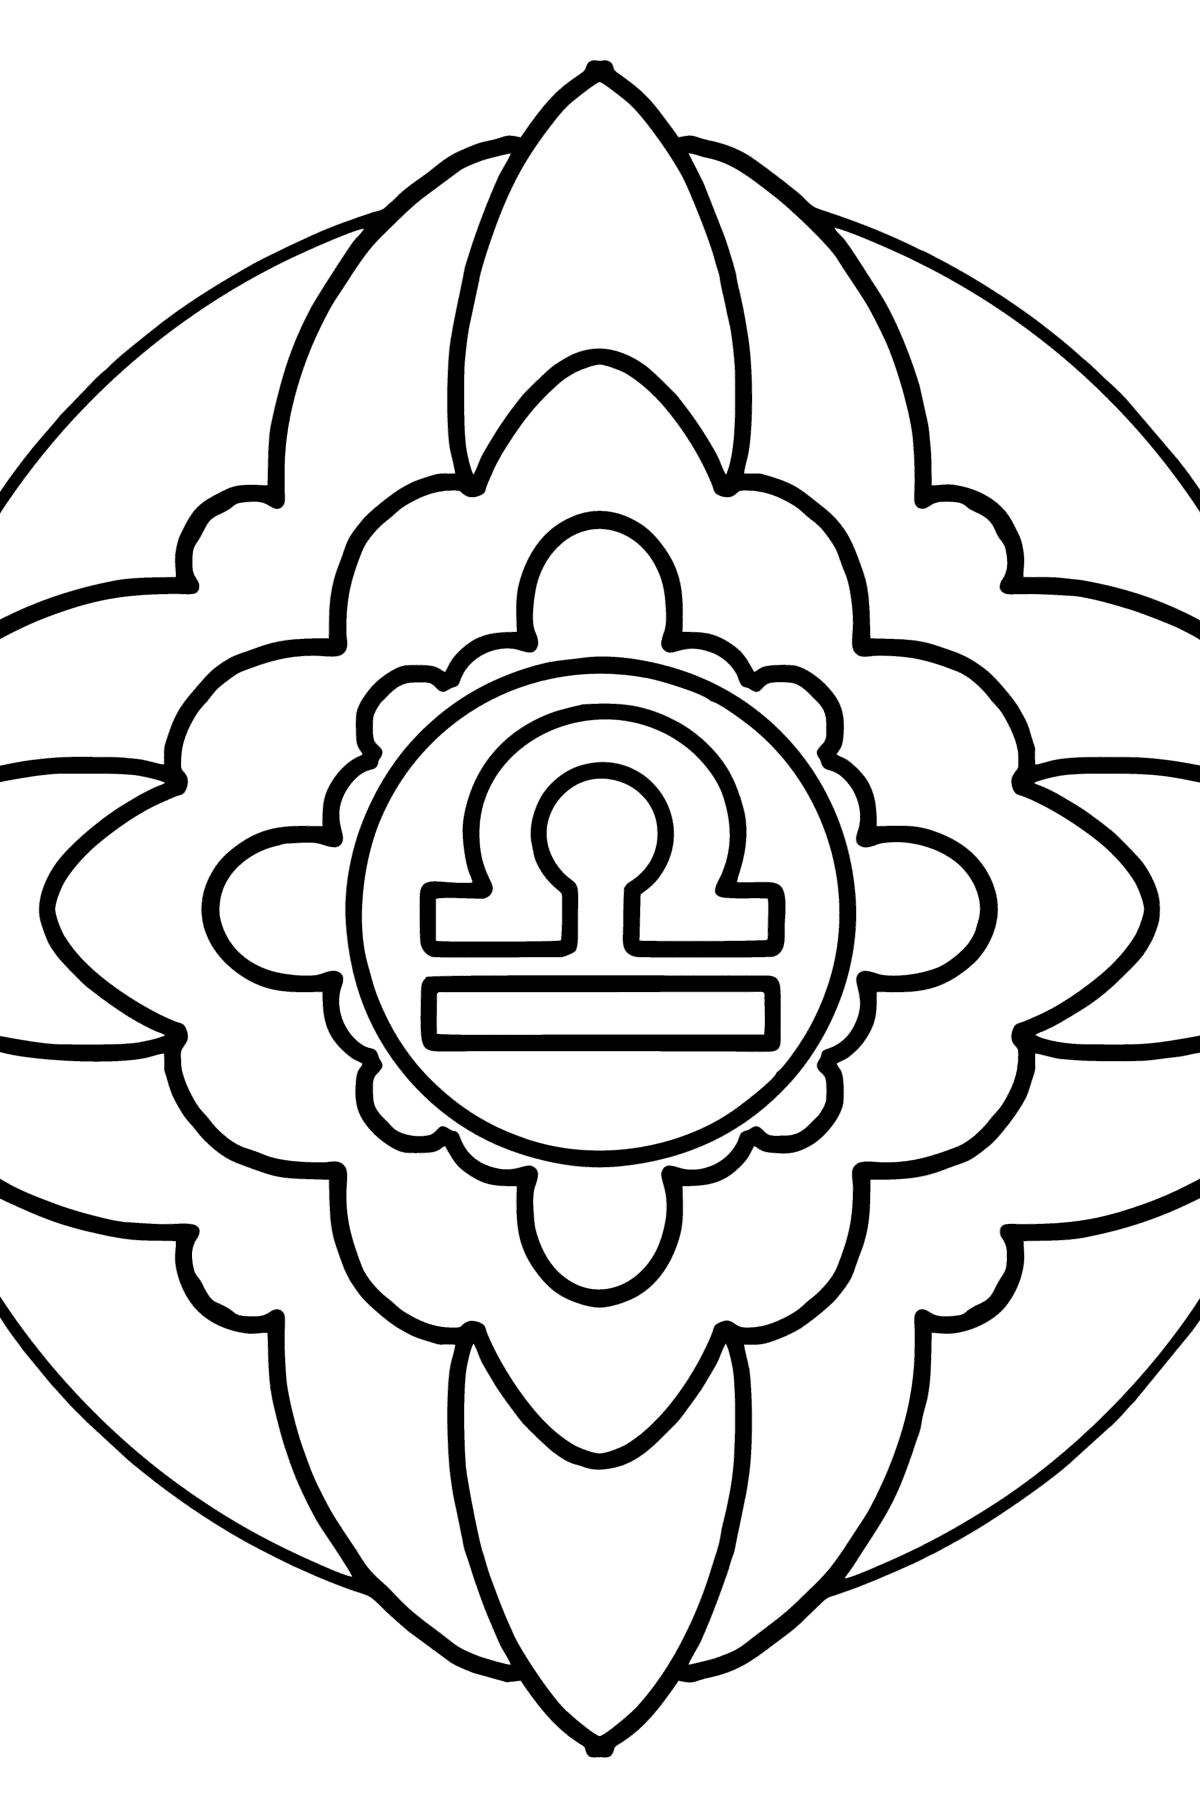 Coloring page - zodiac sign Libra - Coloring Pages for Kids